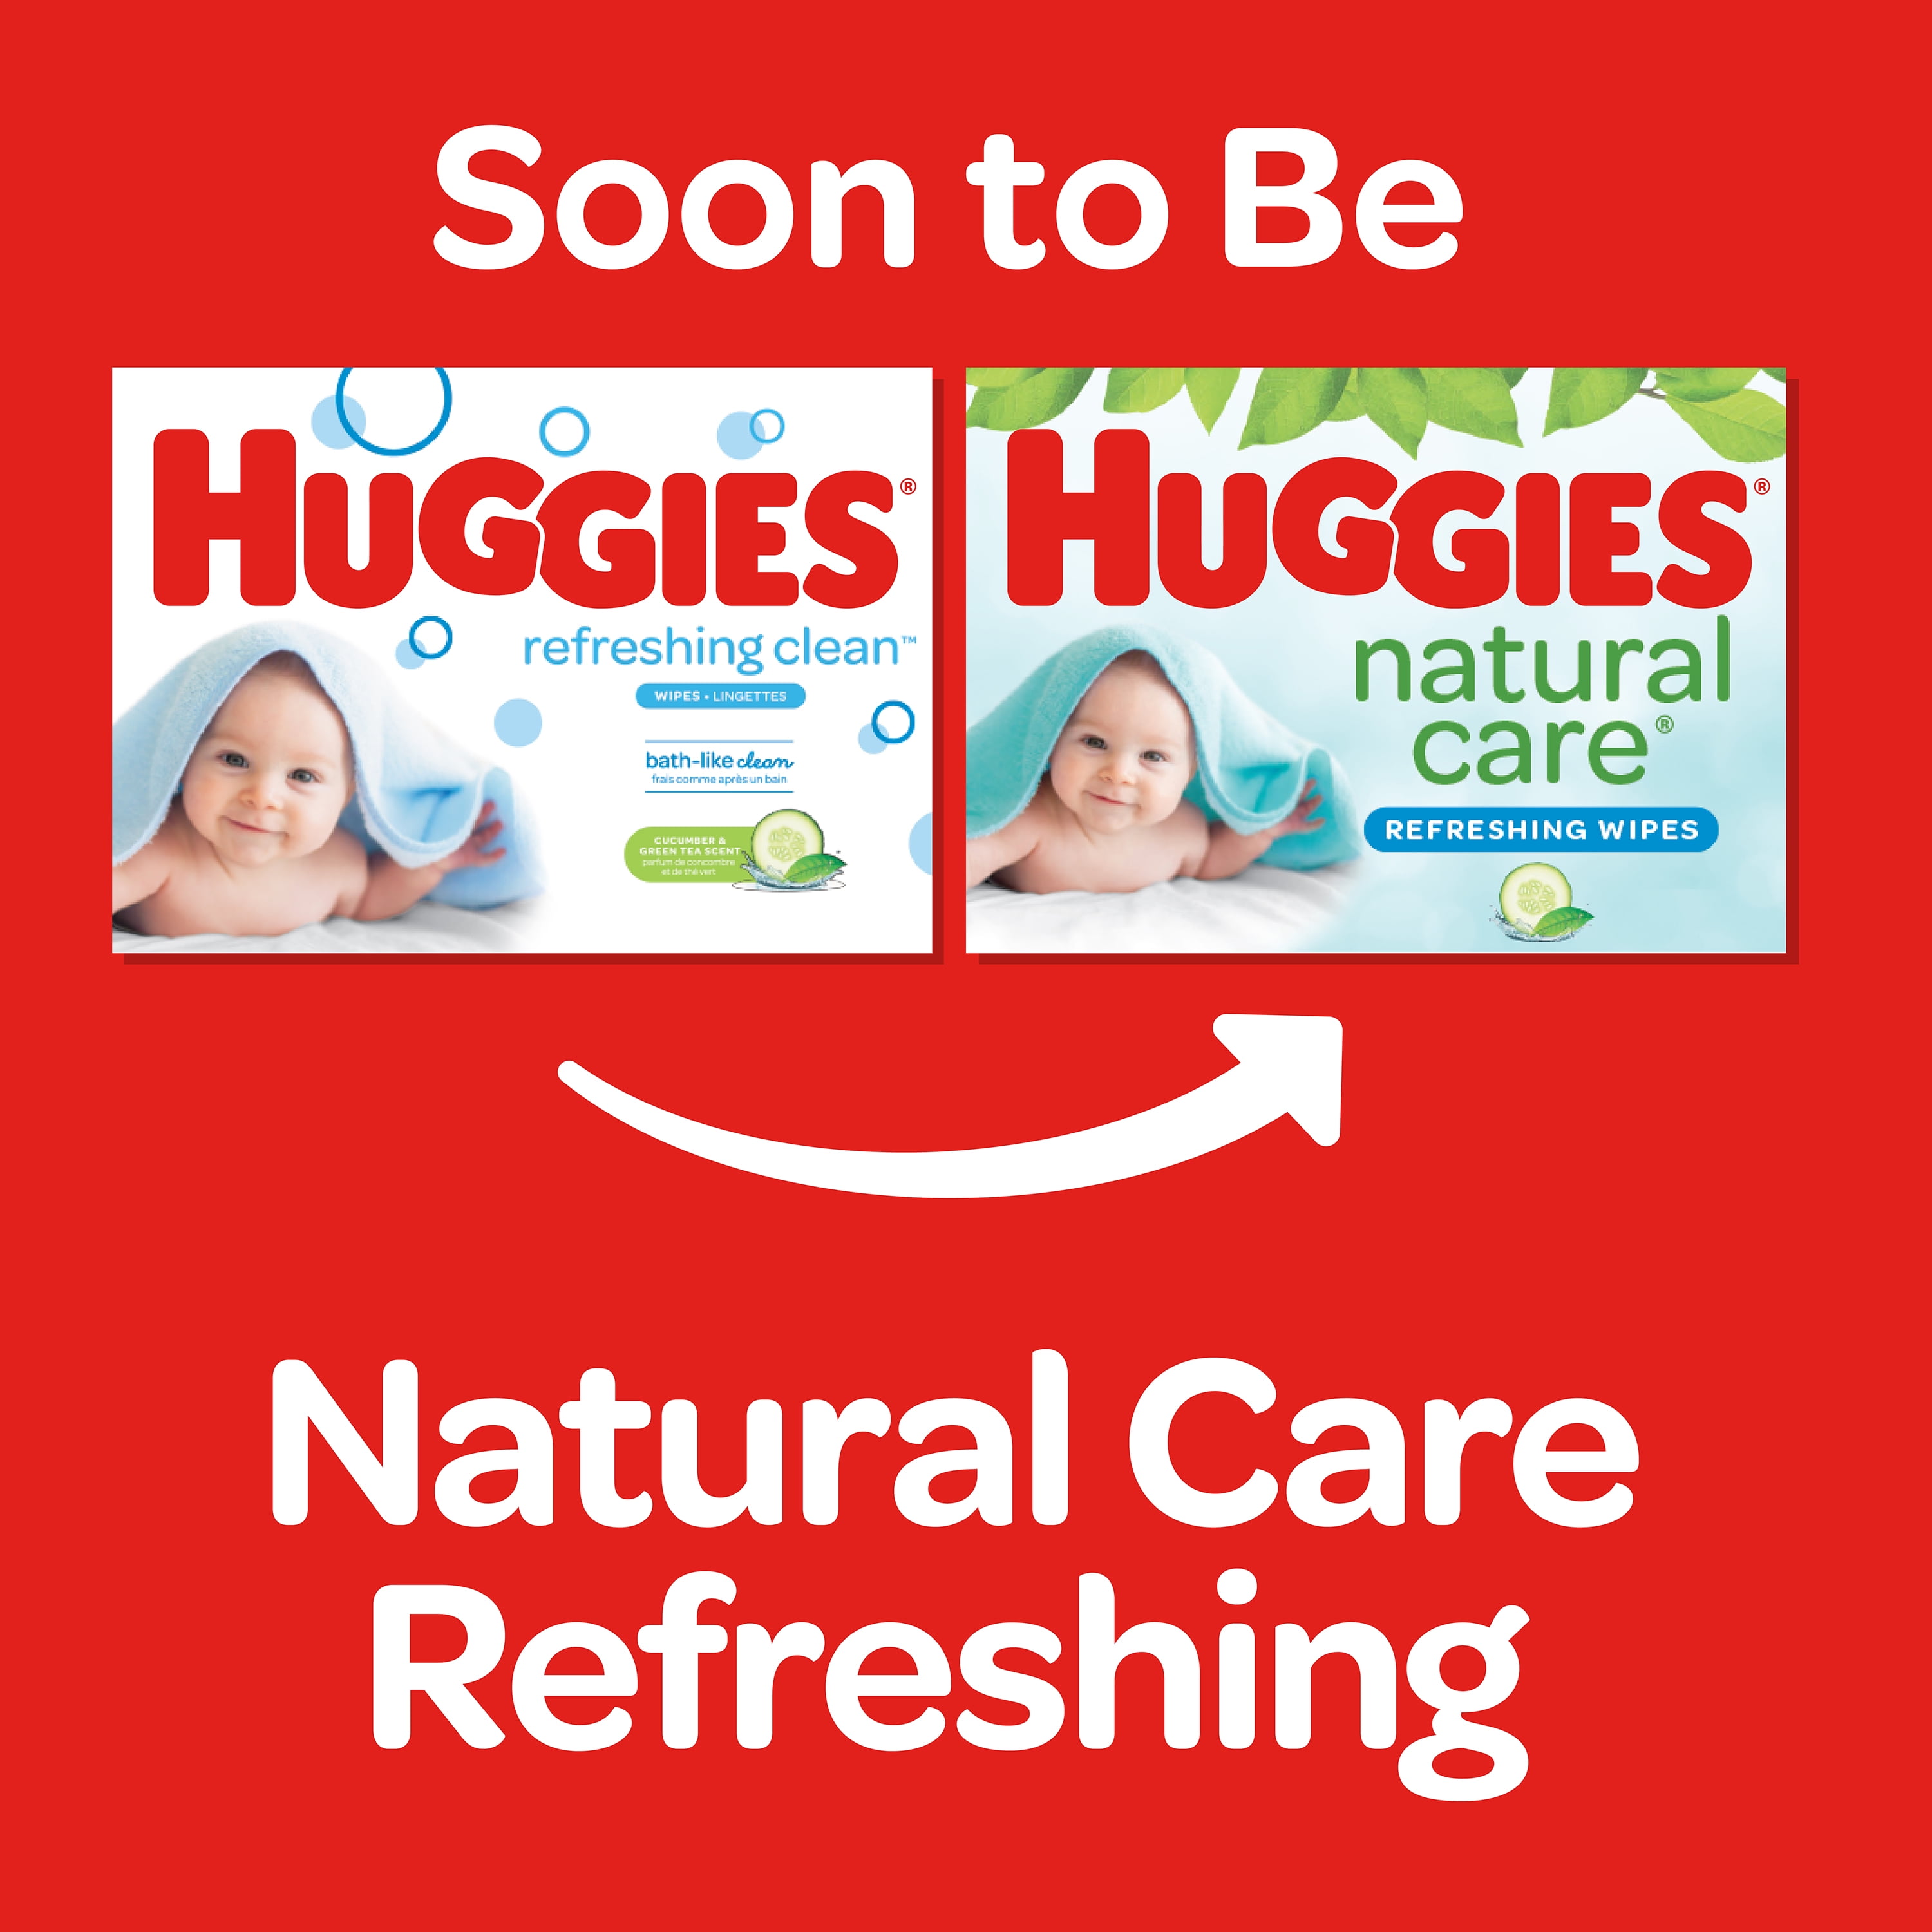 Huggies Refreshing Clean Baby Wipes Cucumber Scent 560 Count